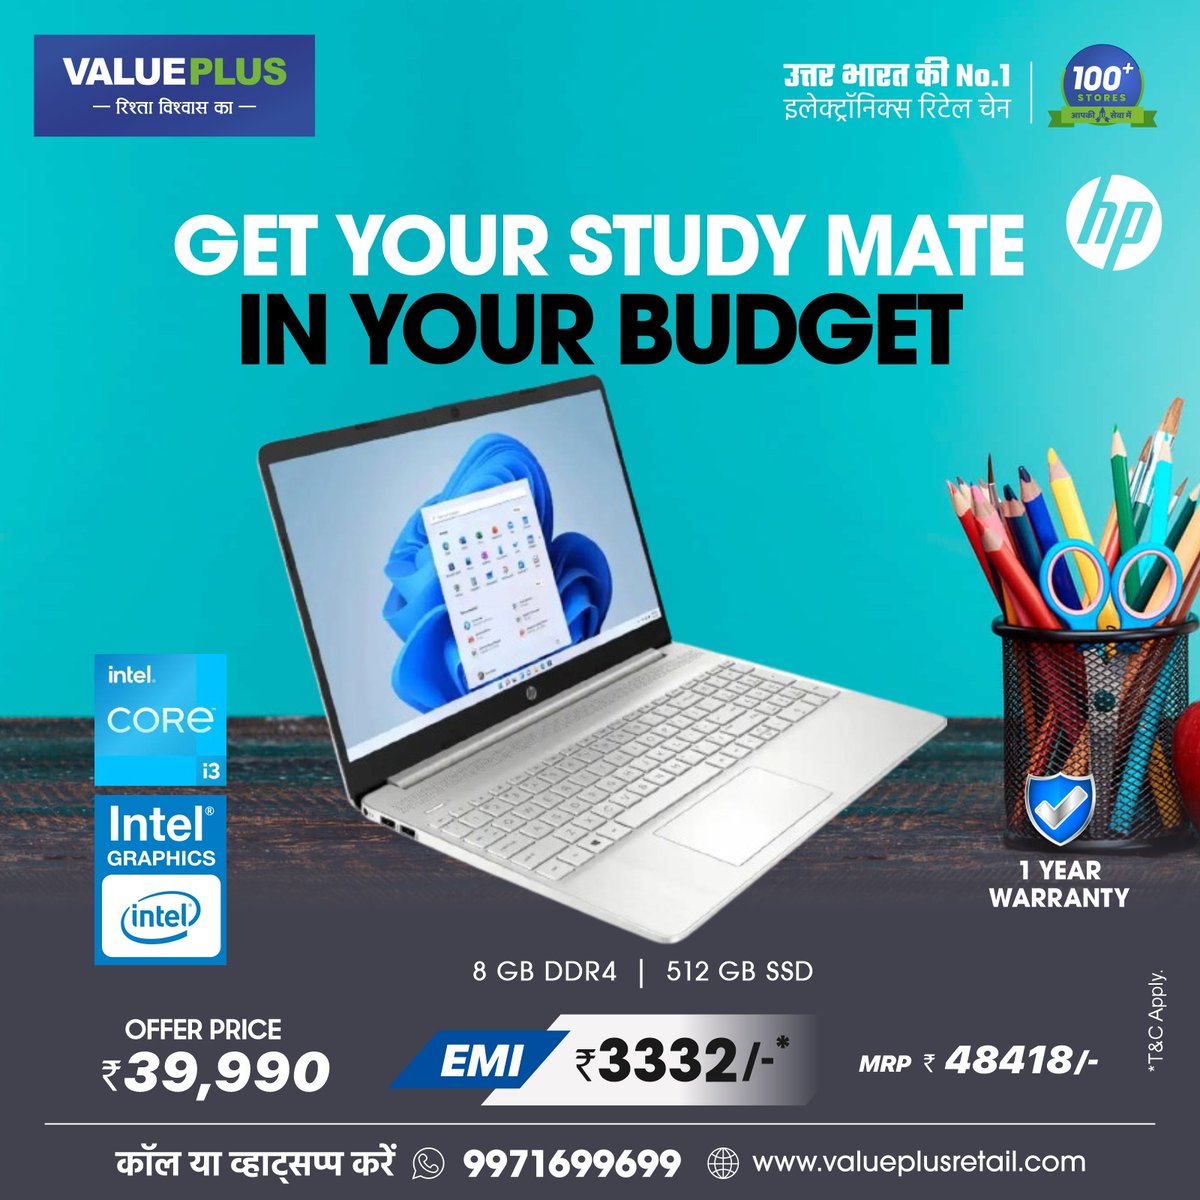 Power Up Your Productivity: Get Your Dream Laptop at Value Plus! We offer a wide selection of laptops at unbeatable prices, perfectly suited for students, professionals. Buy Now call ☎ 9971699699, or visit valueplusretail.com. T&C apply. #Valueplus #hplaptop #smarthplaptop